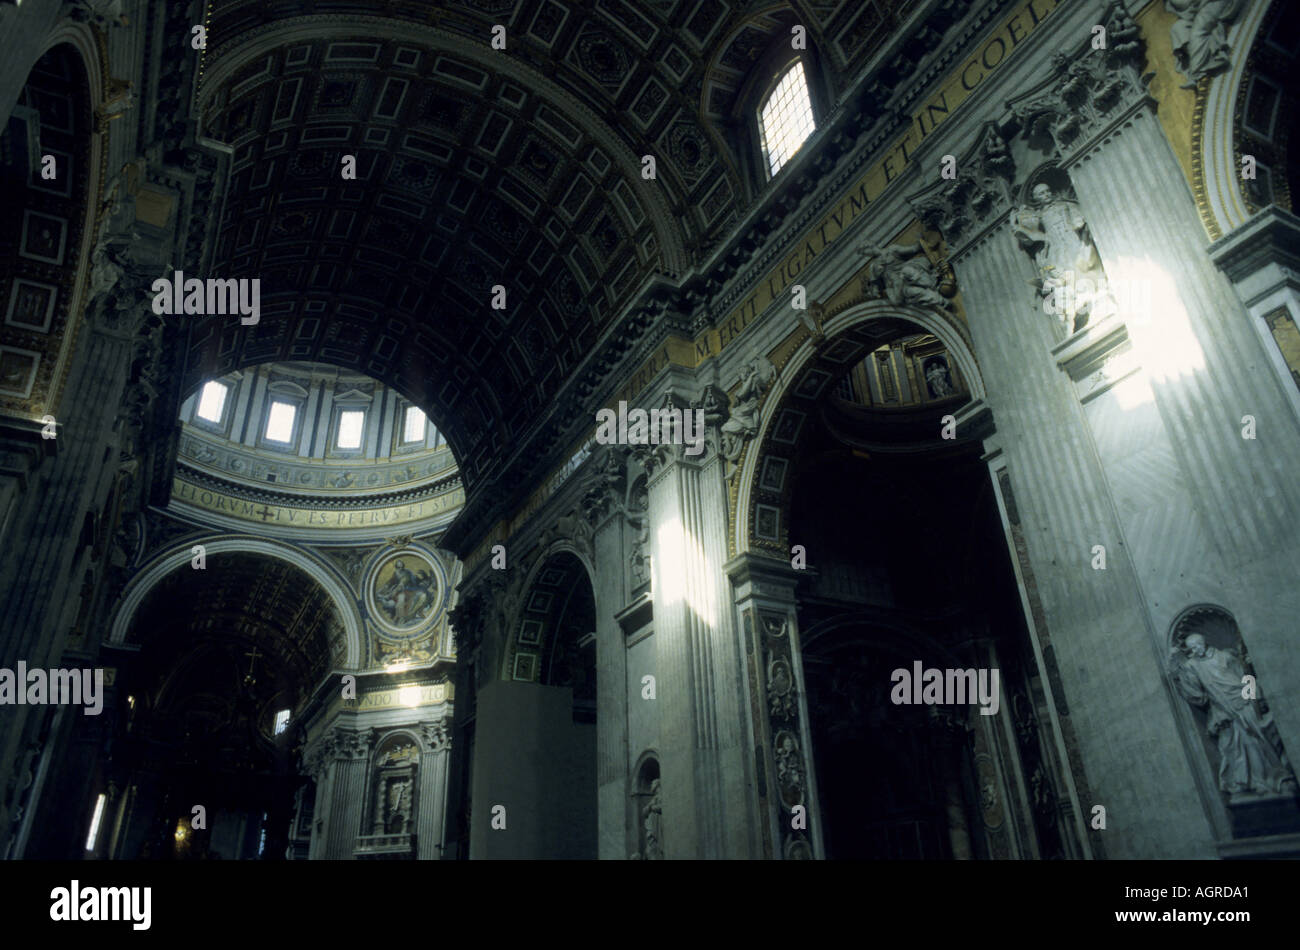 Statues And Ceiling at Saint Peter's Basilica, Vatican City, Rome, Italy. Stock Photo